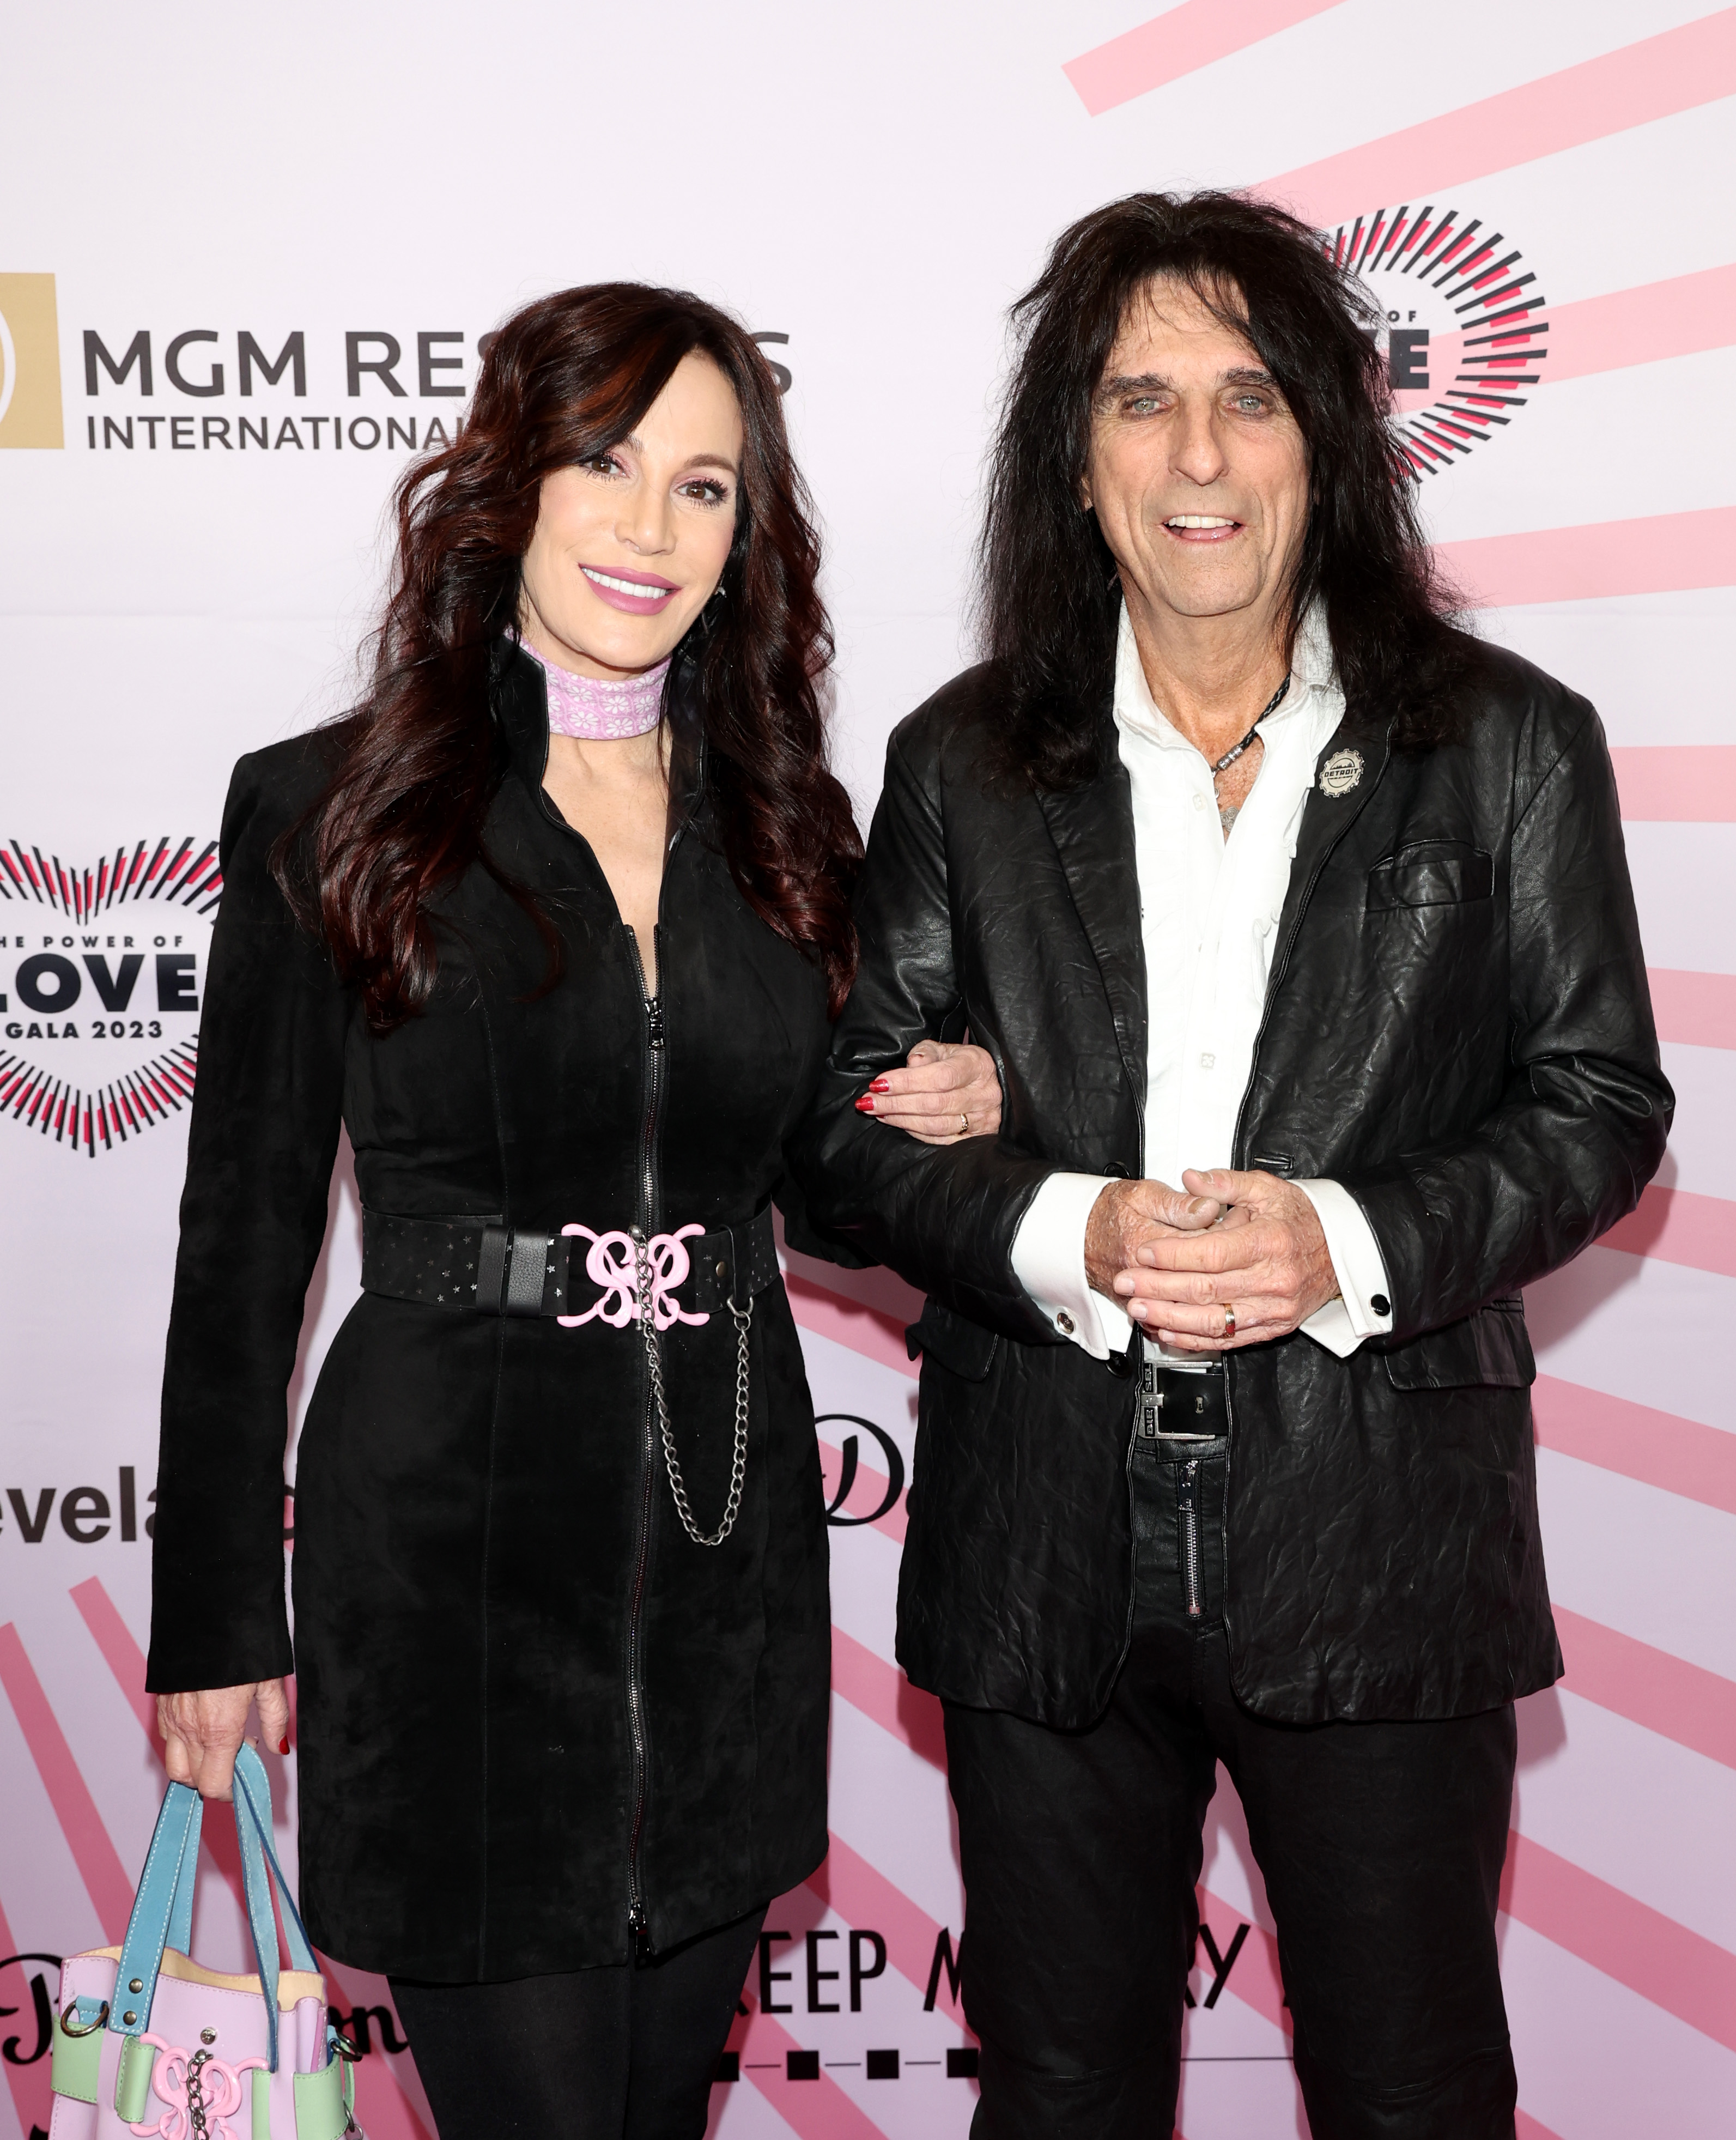 Sheryl Goddard and Alice Cooper attend the 26th annual Keep Memory Alive "Power of Love Gala" benefit for the Cleveland Clinic Lou Ruvo Center for Brain Health at MGM Grand Garden Arena on February 18, 2023, in Las Vegas, Nevada. | Source: Getty Images